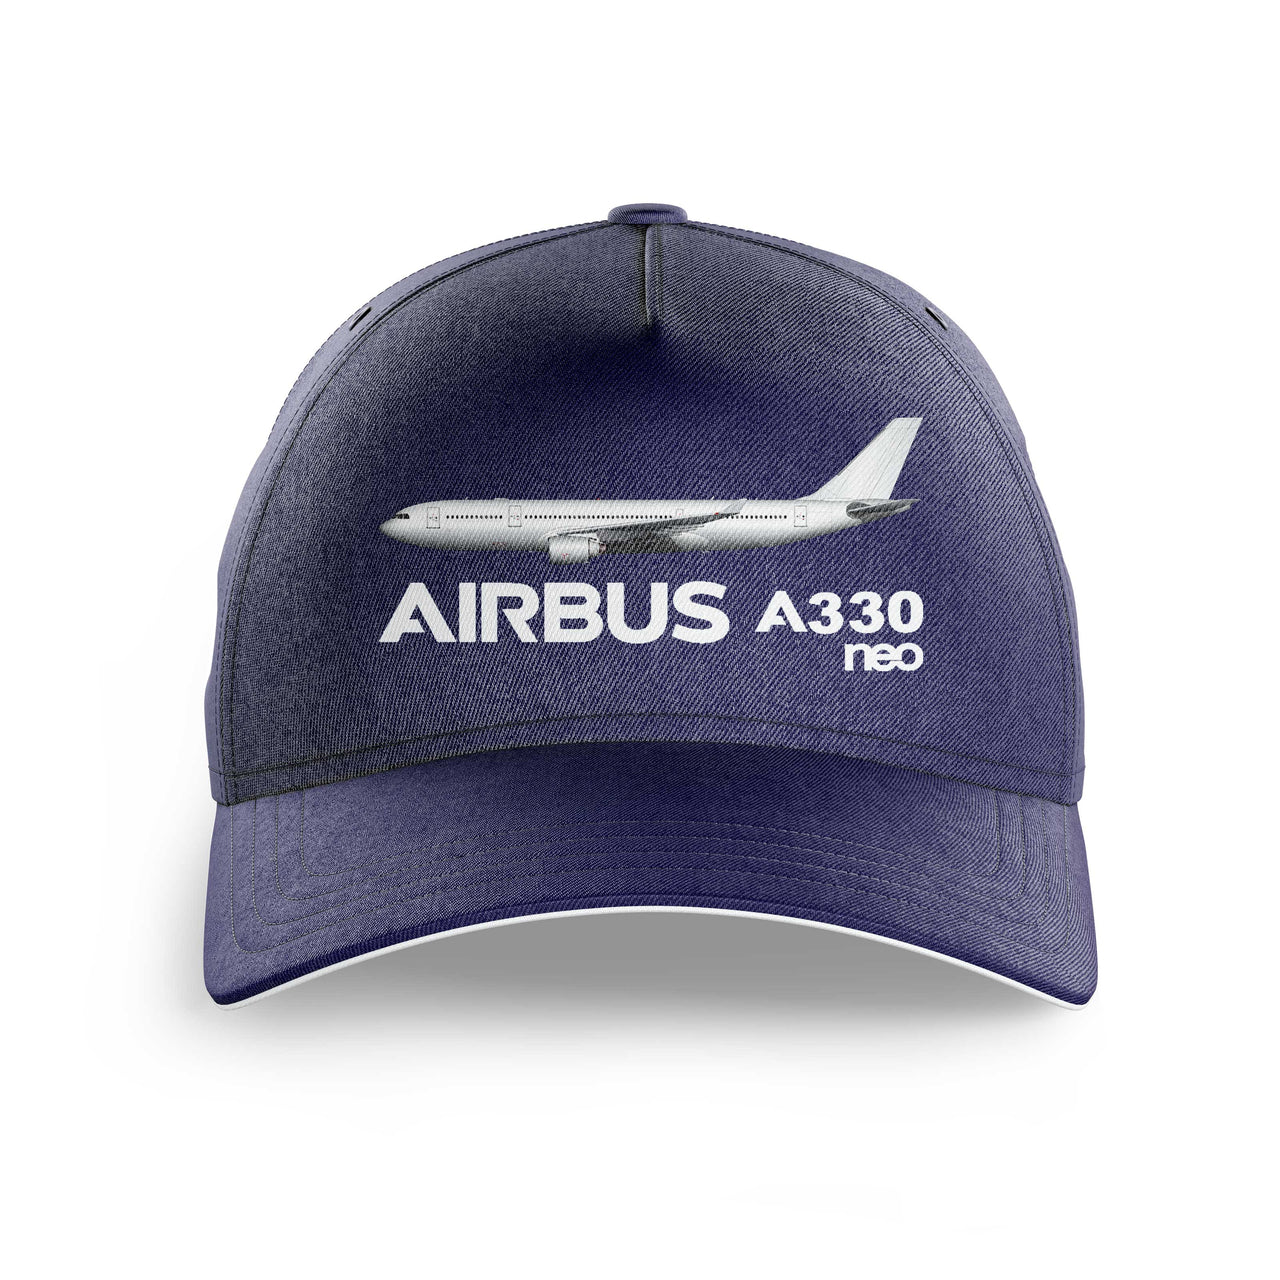 The Airbus A330neo Printed Hats